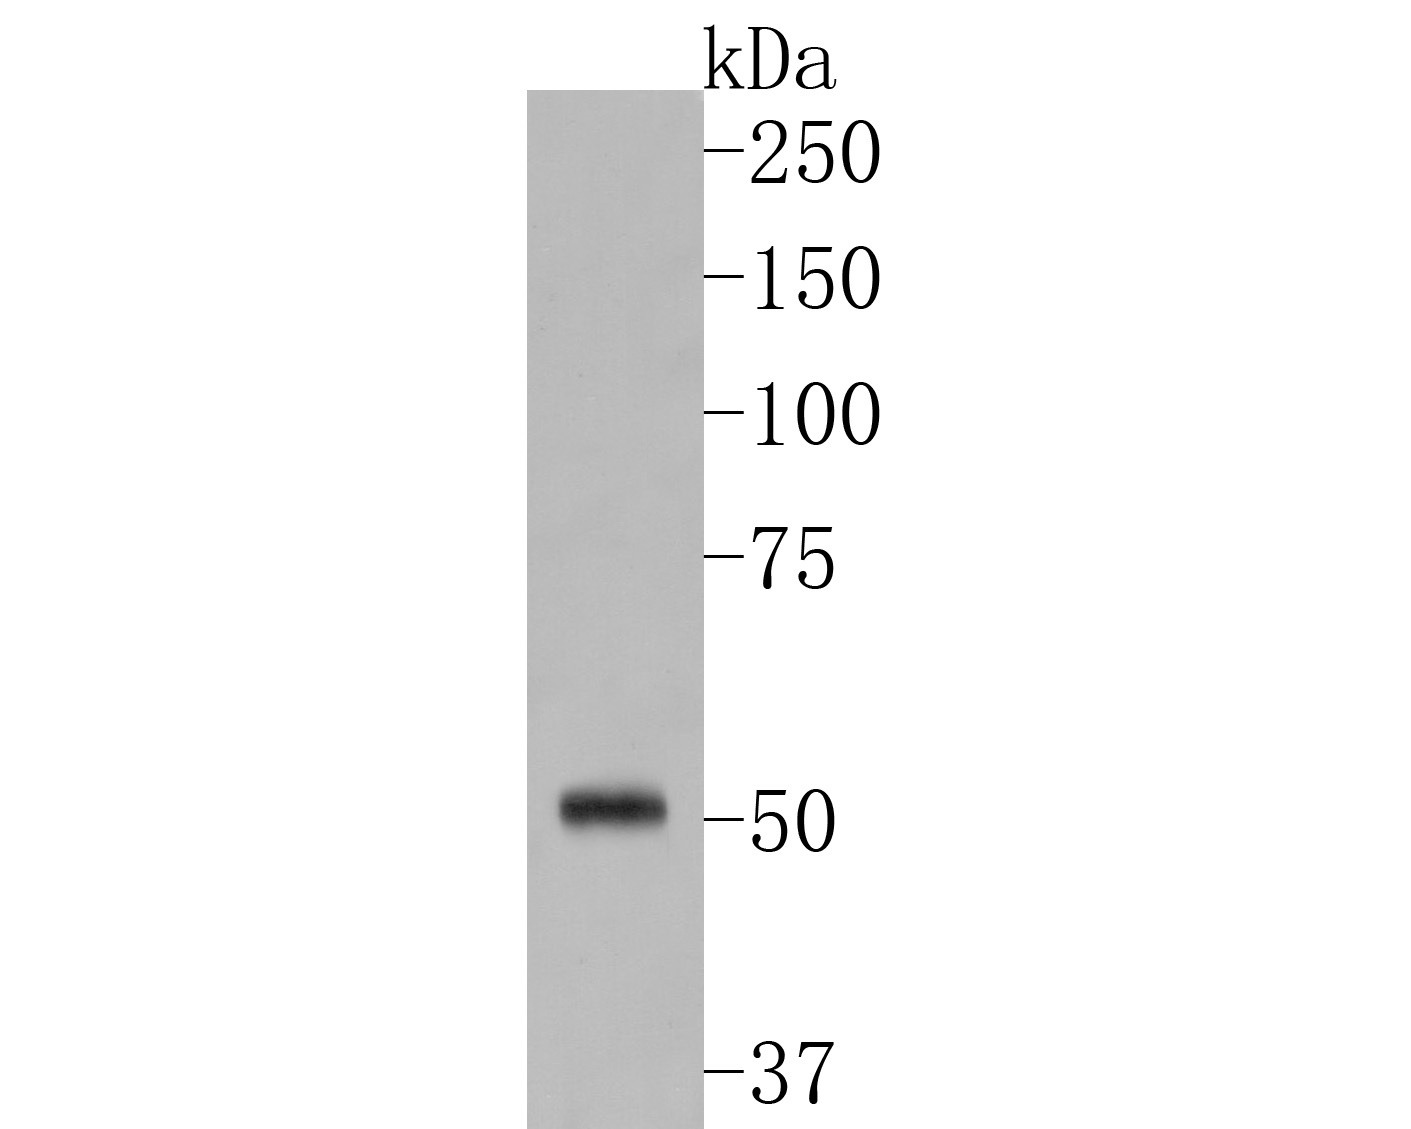 Western blot analysis of SERPINC1 on zebrafish tissue lysates. Proteins were transferred to a PVDF membrane and blocked with 5% BSA in PBS for 1 hour at room temperature. The primary antibody (EM1901-11, 1/500) was used in 5% BSA at room temperature for 2 hours. Goat Anti-Rabbit IgG - HRP Secondary Antibody (HA1001) at 1:5,000 dilution was used for 1 hour at room temperature.